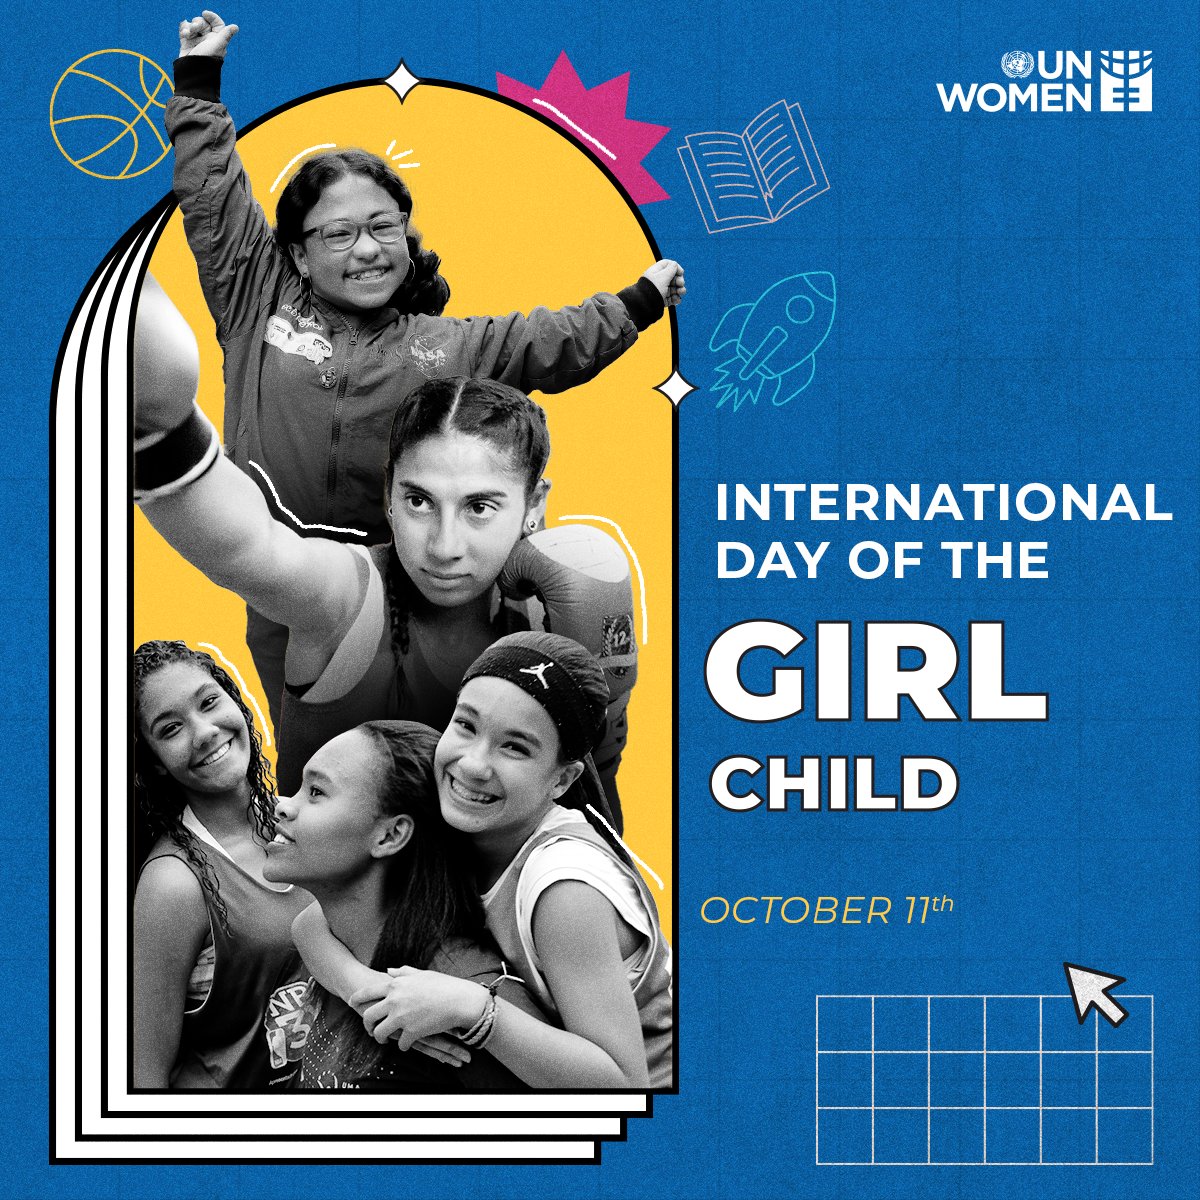 UN Marks International Day Of The Girl Child